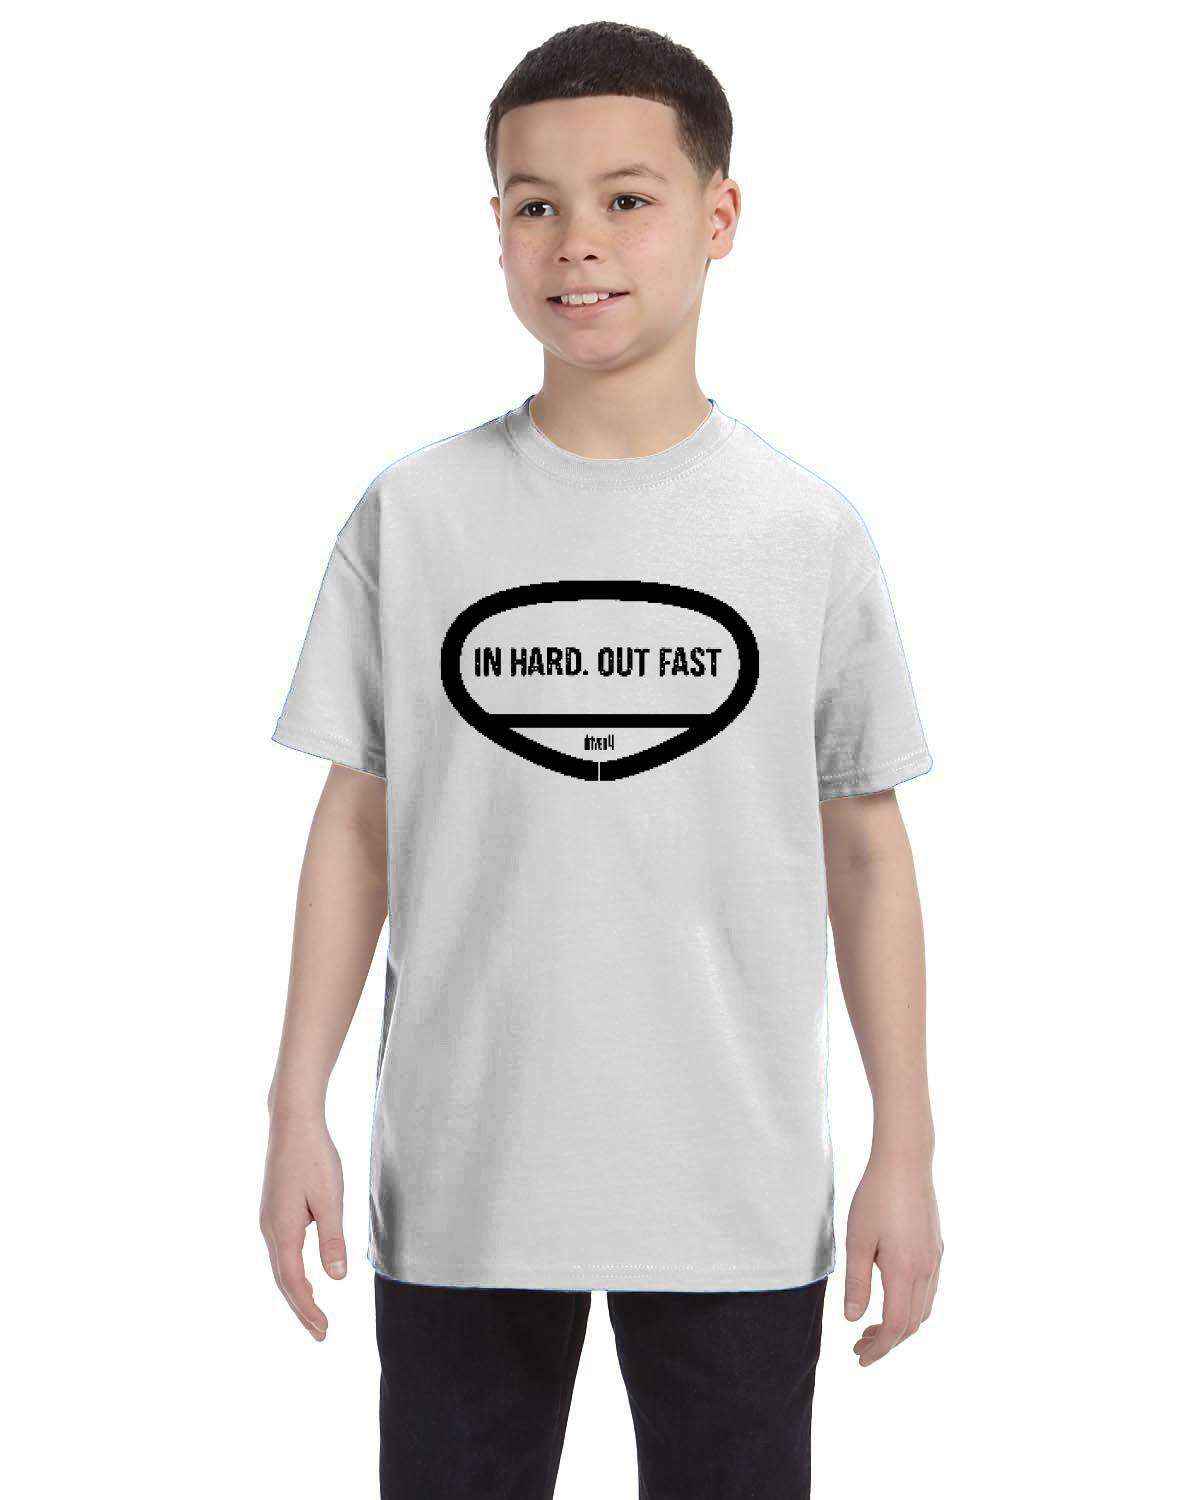 D4C Kid's T-Shirt - In Hard Out Fast